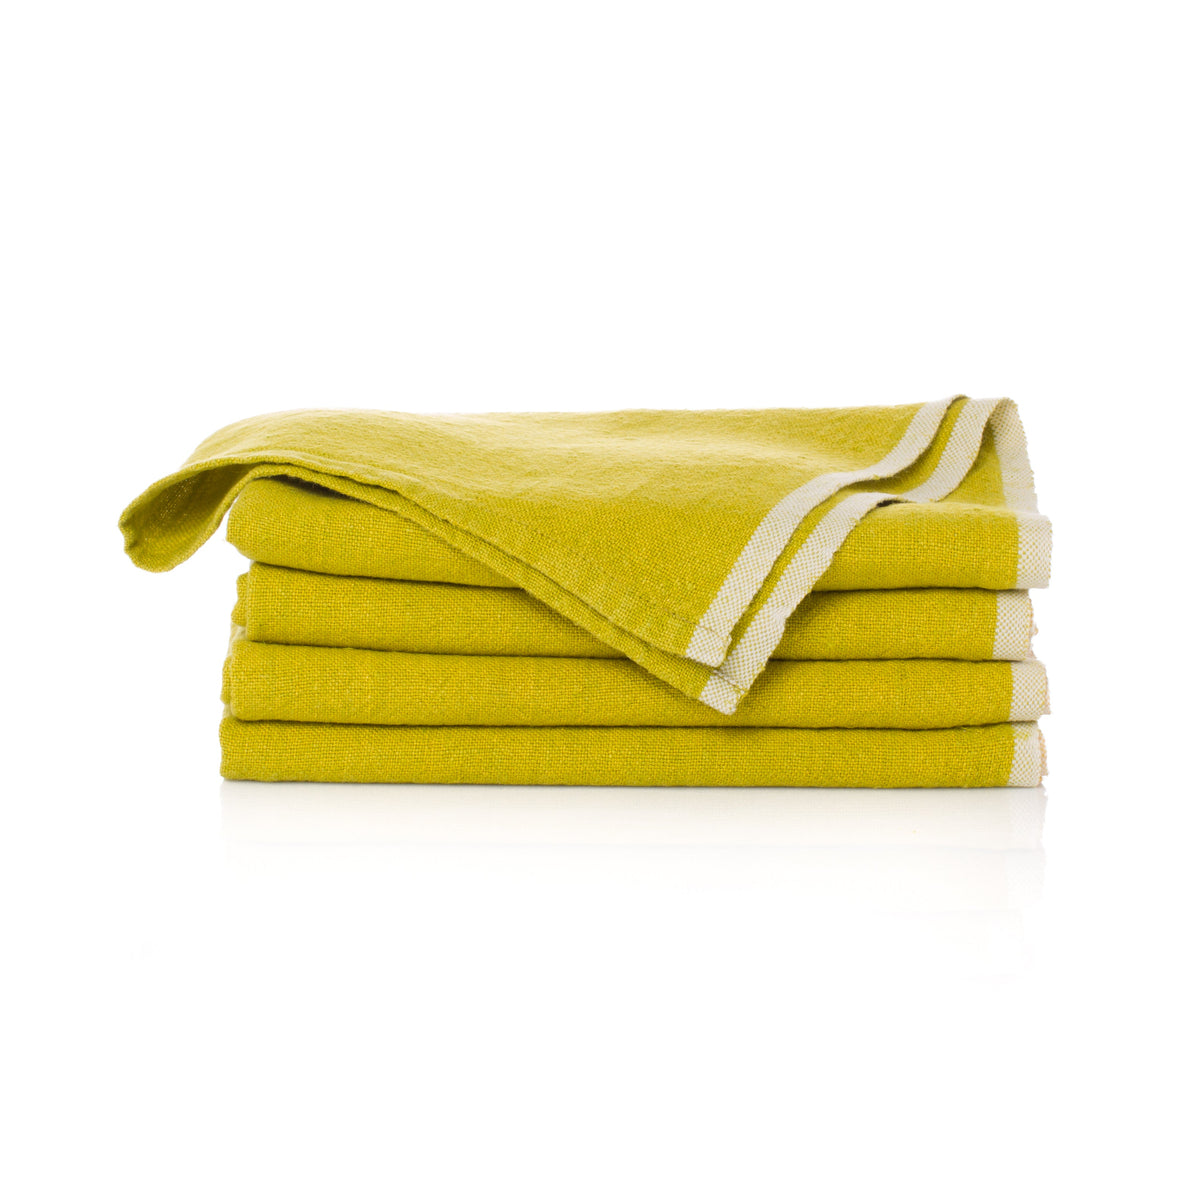 Chunky Linen Napkins in Lime, Set of 4